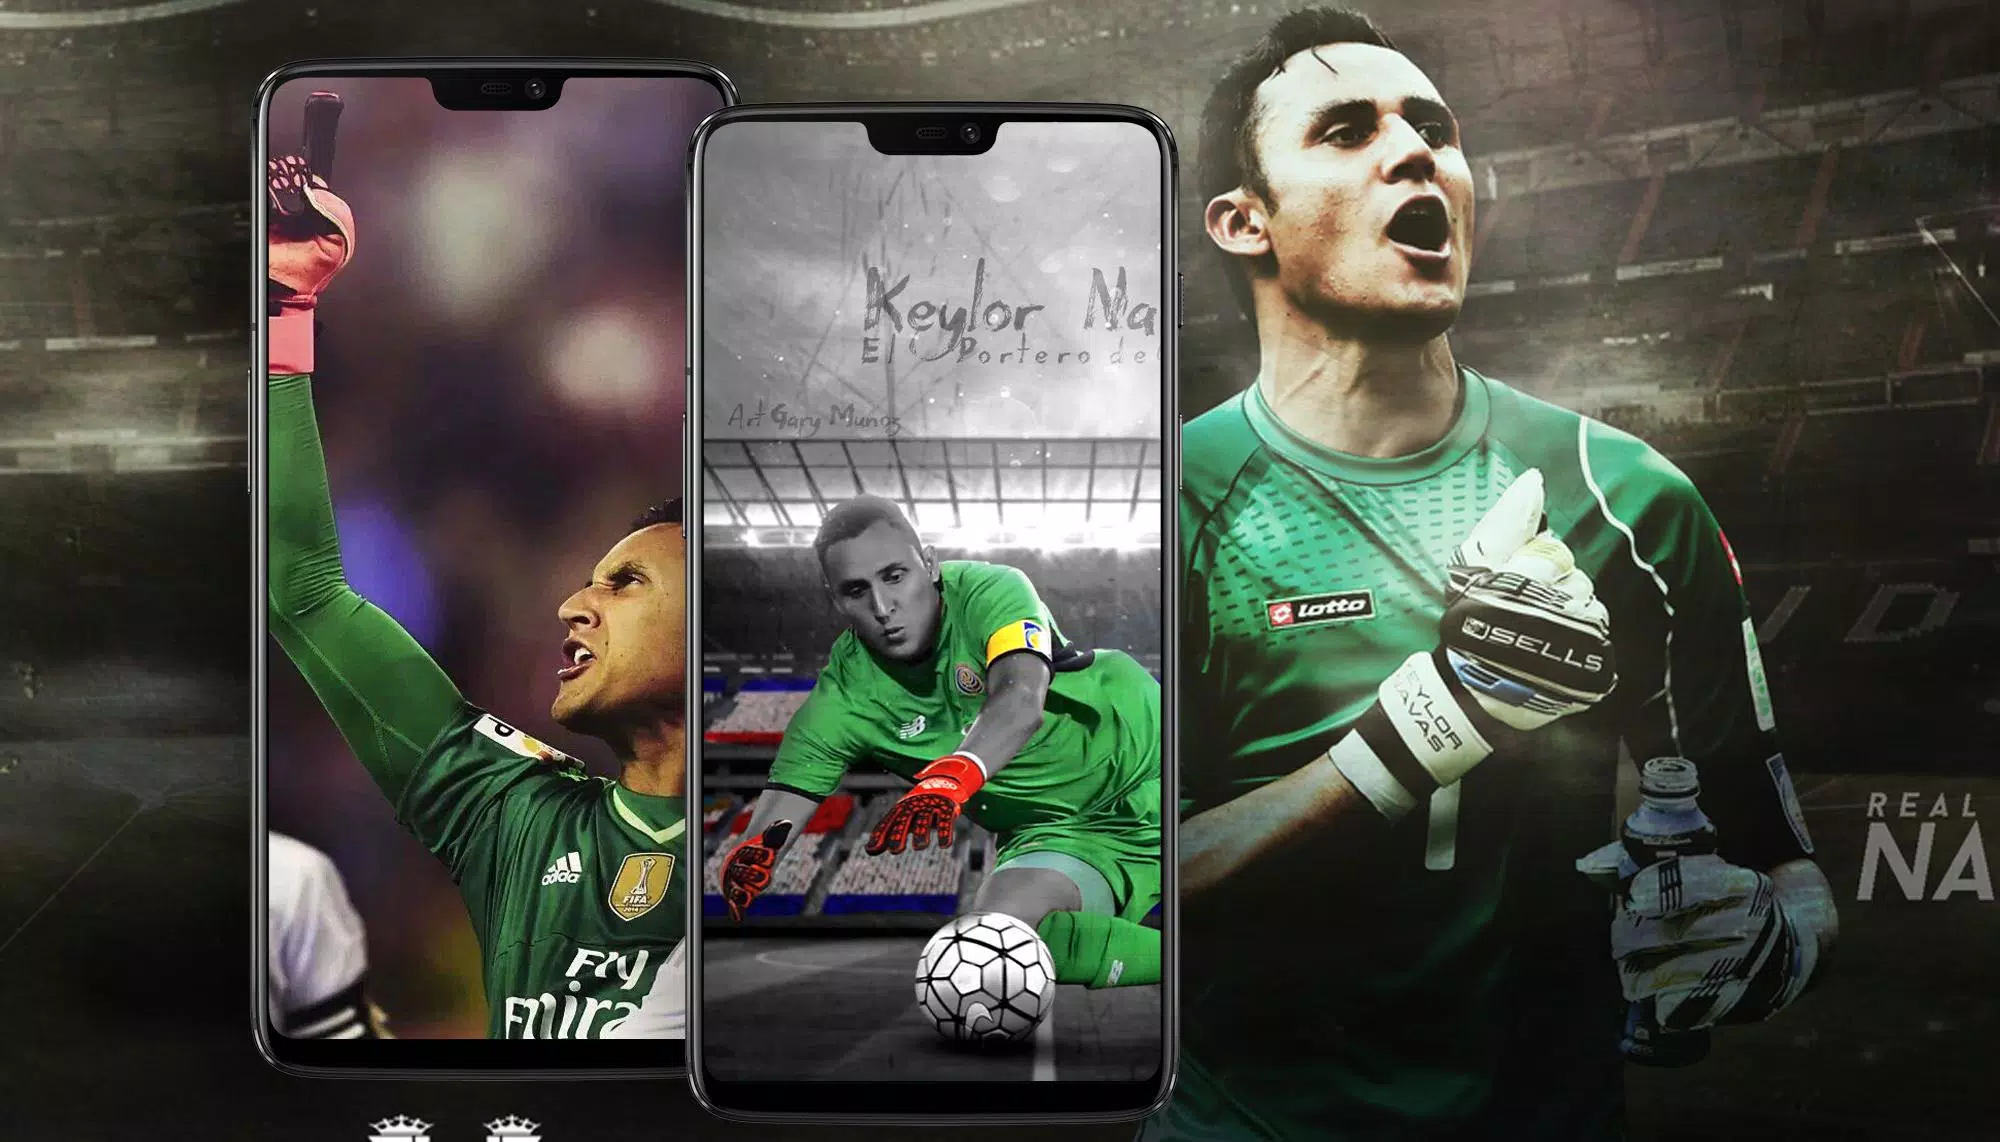 Keylor navas wallpaper best hd apk for android download